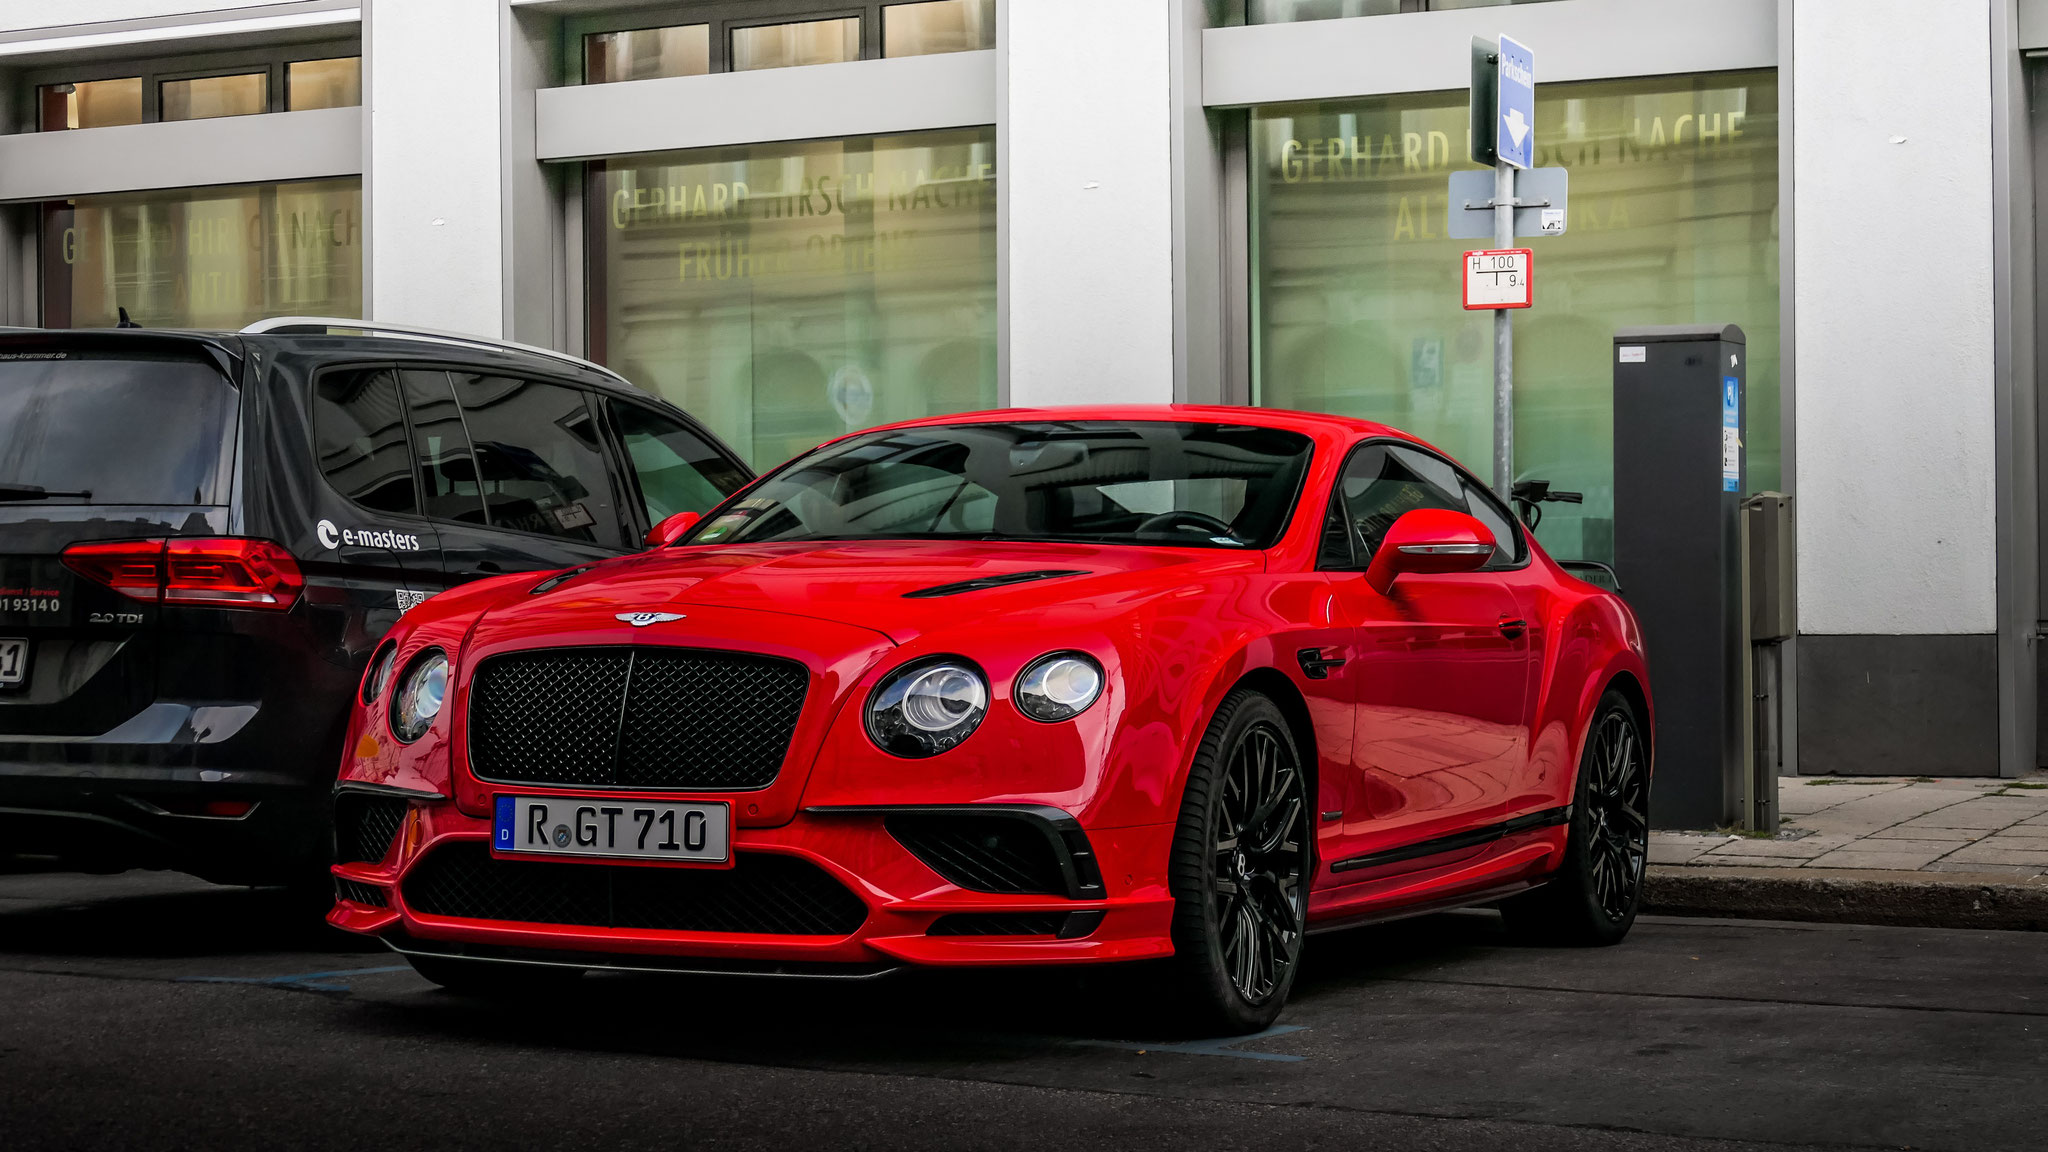 Bentley Continental GT Supersports - R-GT710